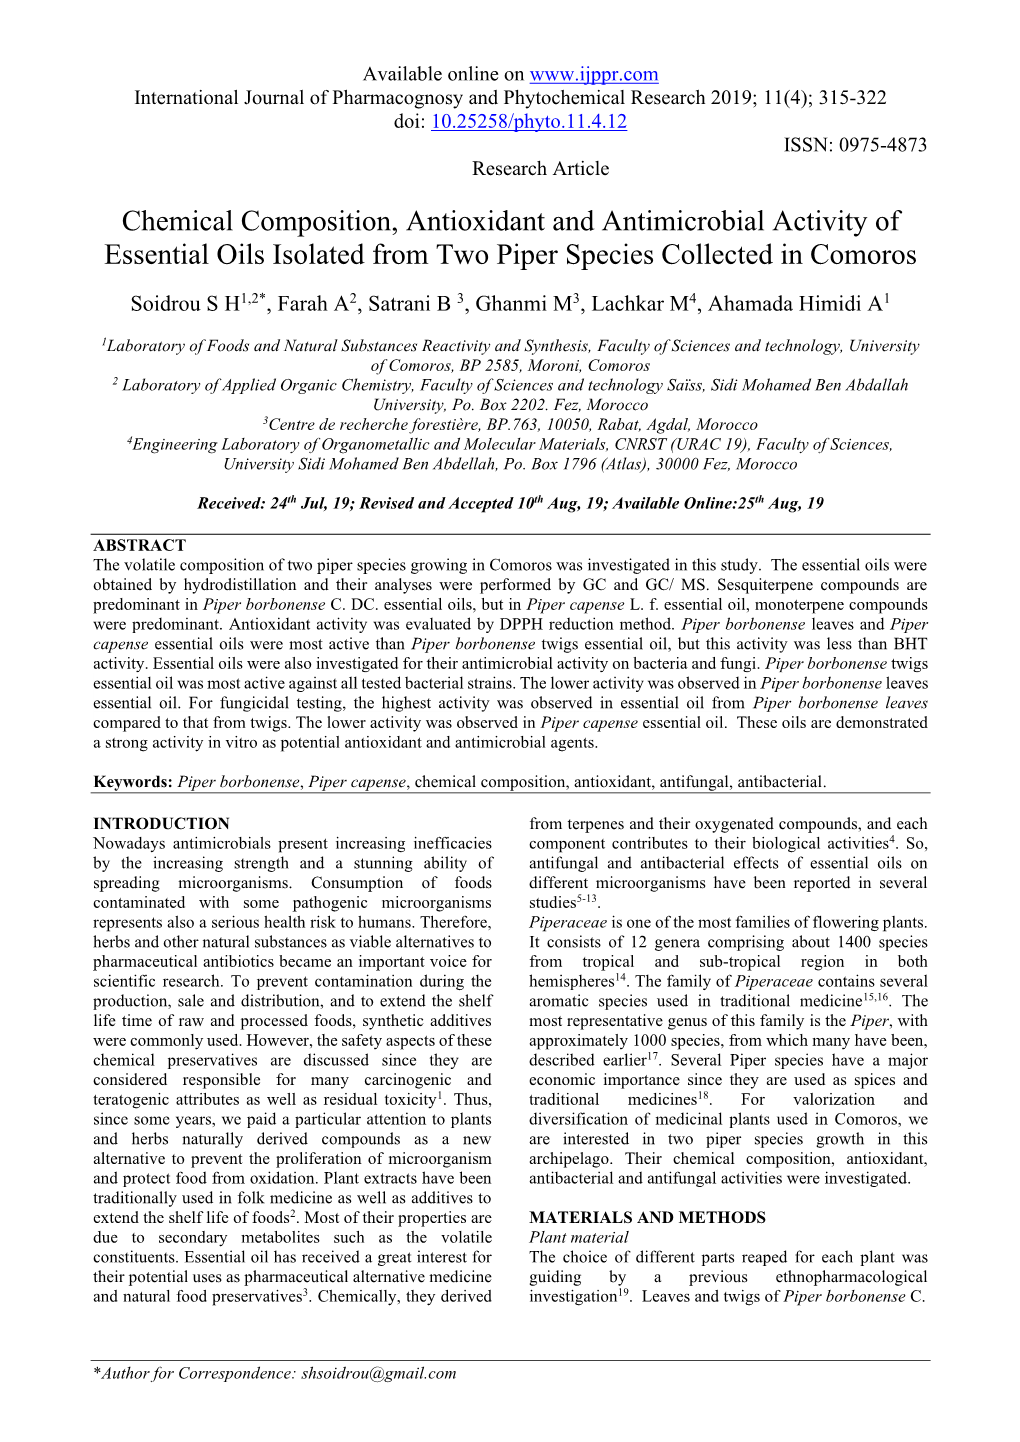 Chemical Composition, Antioxidant and Antimicrobial Activity of Essential Oils Isolated from Two Piper Species Collected in Comoros